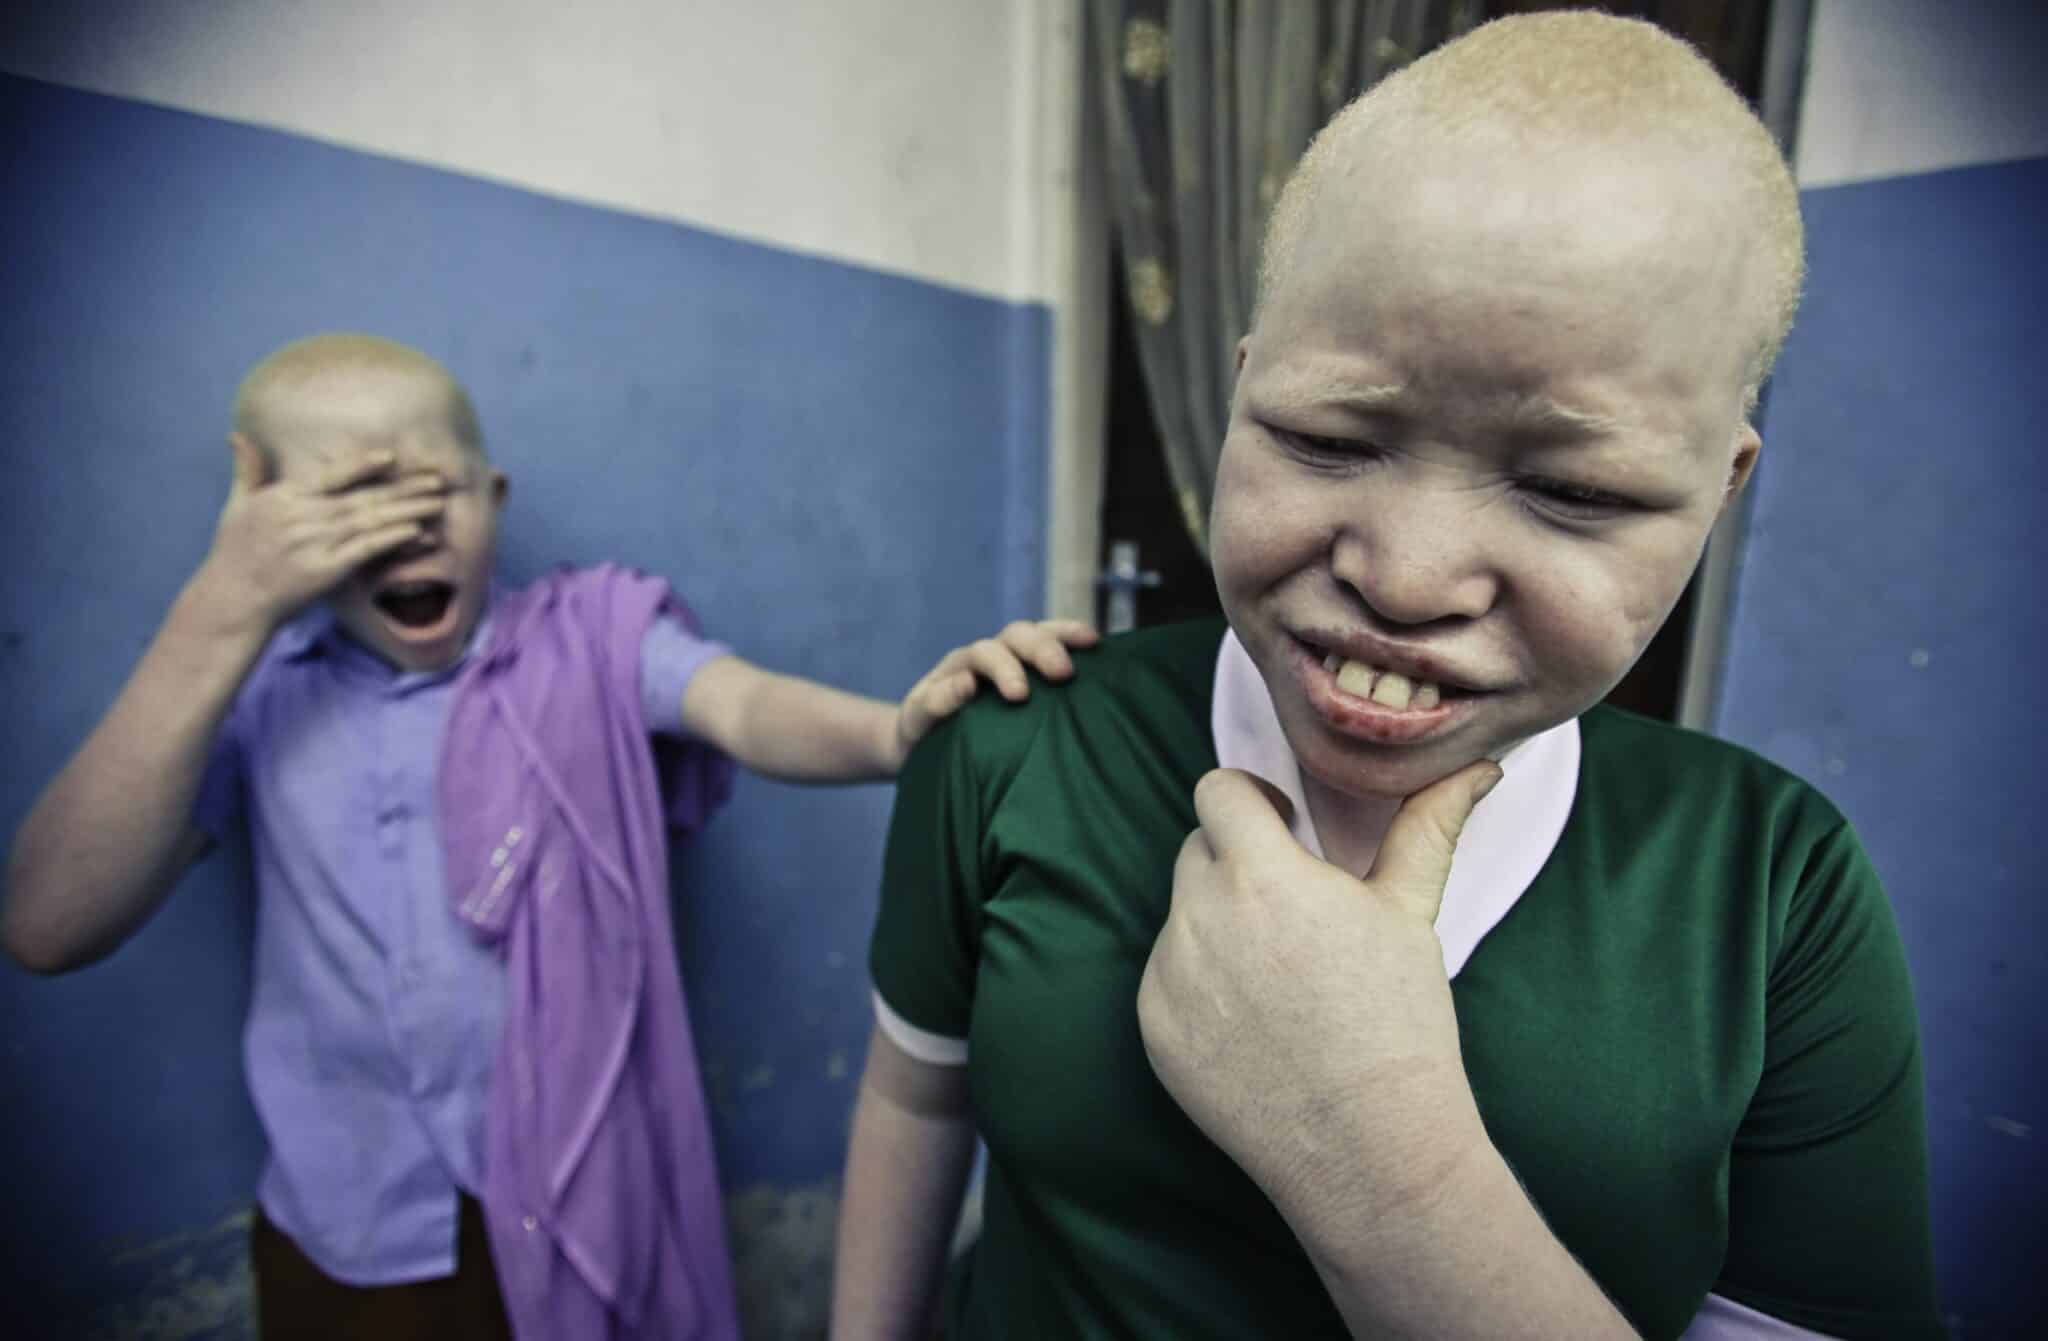 ALBINO: A STORY OF FEAR AND PREJUDICE